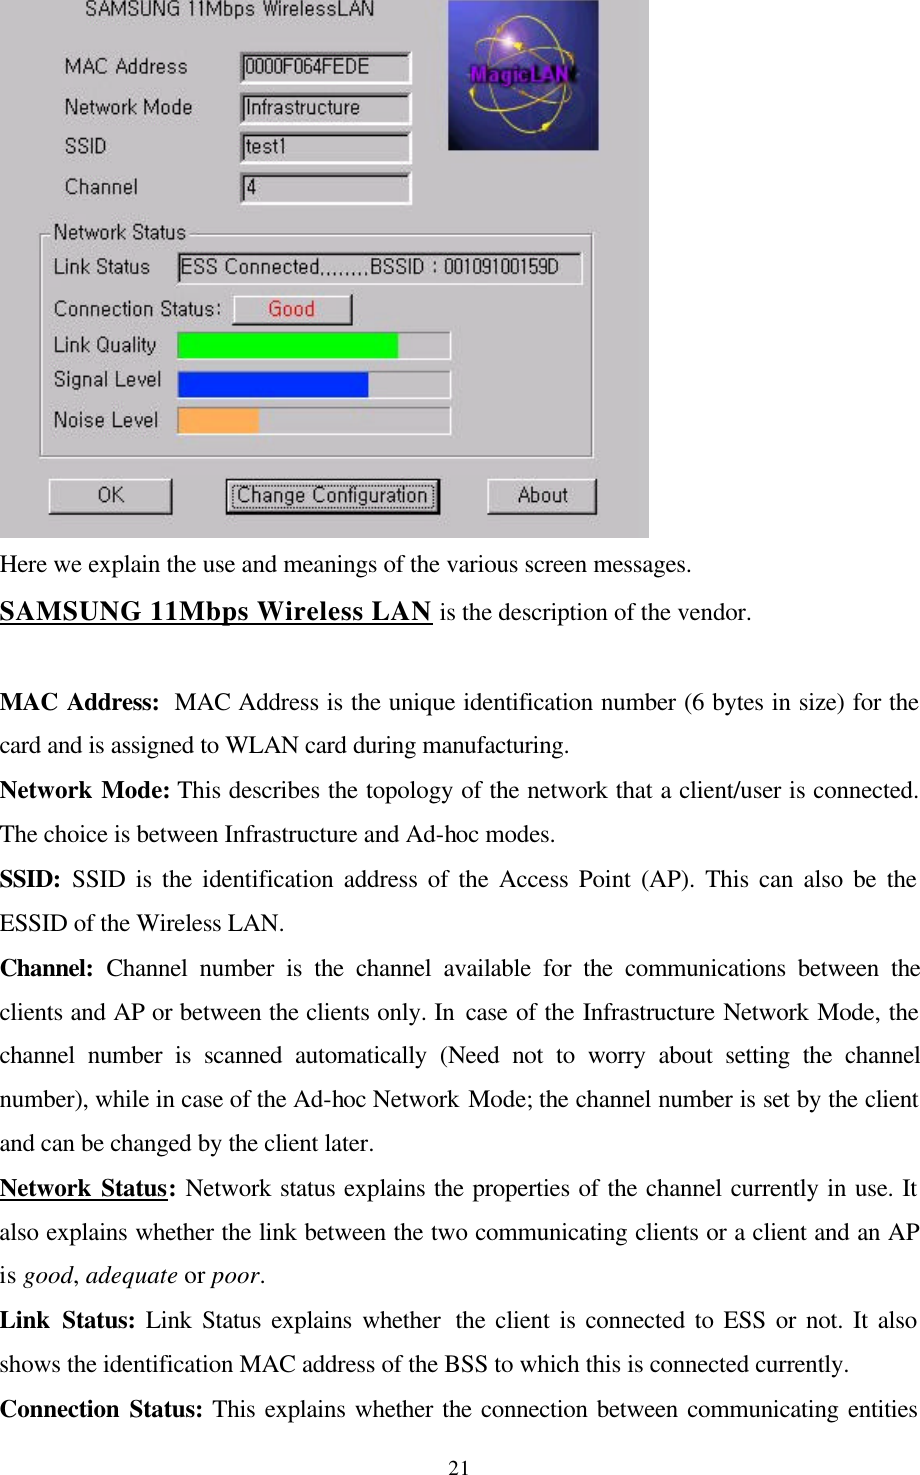  21 Here we explain the use and meanings of the various screen messages.  SAMSUNG 11Mbps Wireless LAN is the description of the vendor.  MAC Address:  MAC Address is the unique identification number (6 bytes in size) for the card and is assigned to WLAN card during manufacturing. Network Mode: This describes the topology of the network that a client/user is connected. The choice is between Infrastructure and Ad-hoc modes.  SSID: SSID is the identification address of the Access Point (AP). This can also be the ESSID of the Wireless LAN. Channel: Channel number is the channel available for the communications between the clients and AP or between the clients only. In case of the Infrastructure Network Mode, the channel number is scanned automatically (Need not to worry about setting the channel number), while in case of the Ad-hoc Network Mode; the channel number is set by the client and can be changed by the client later. Network Status: Network status explains the properties of the channel currently in use. It also explains whether the link between the two communicating clients or a client and an AP is good, adequate or poor. Link Status: Link Status explains whether  the client is connected to ESS or not. It also shows the identification MAC address of the BSS to which this is connected currently. Connection Status: This explains whether the connection between communicating entities 